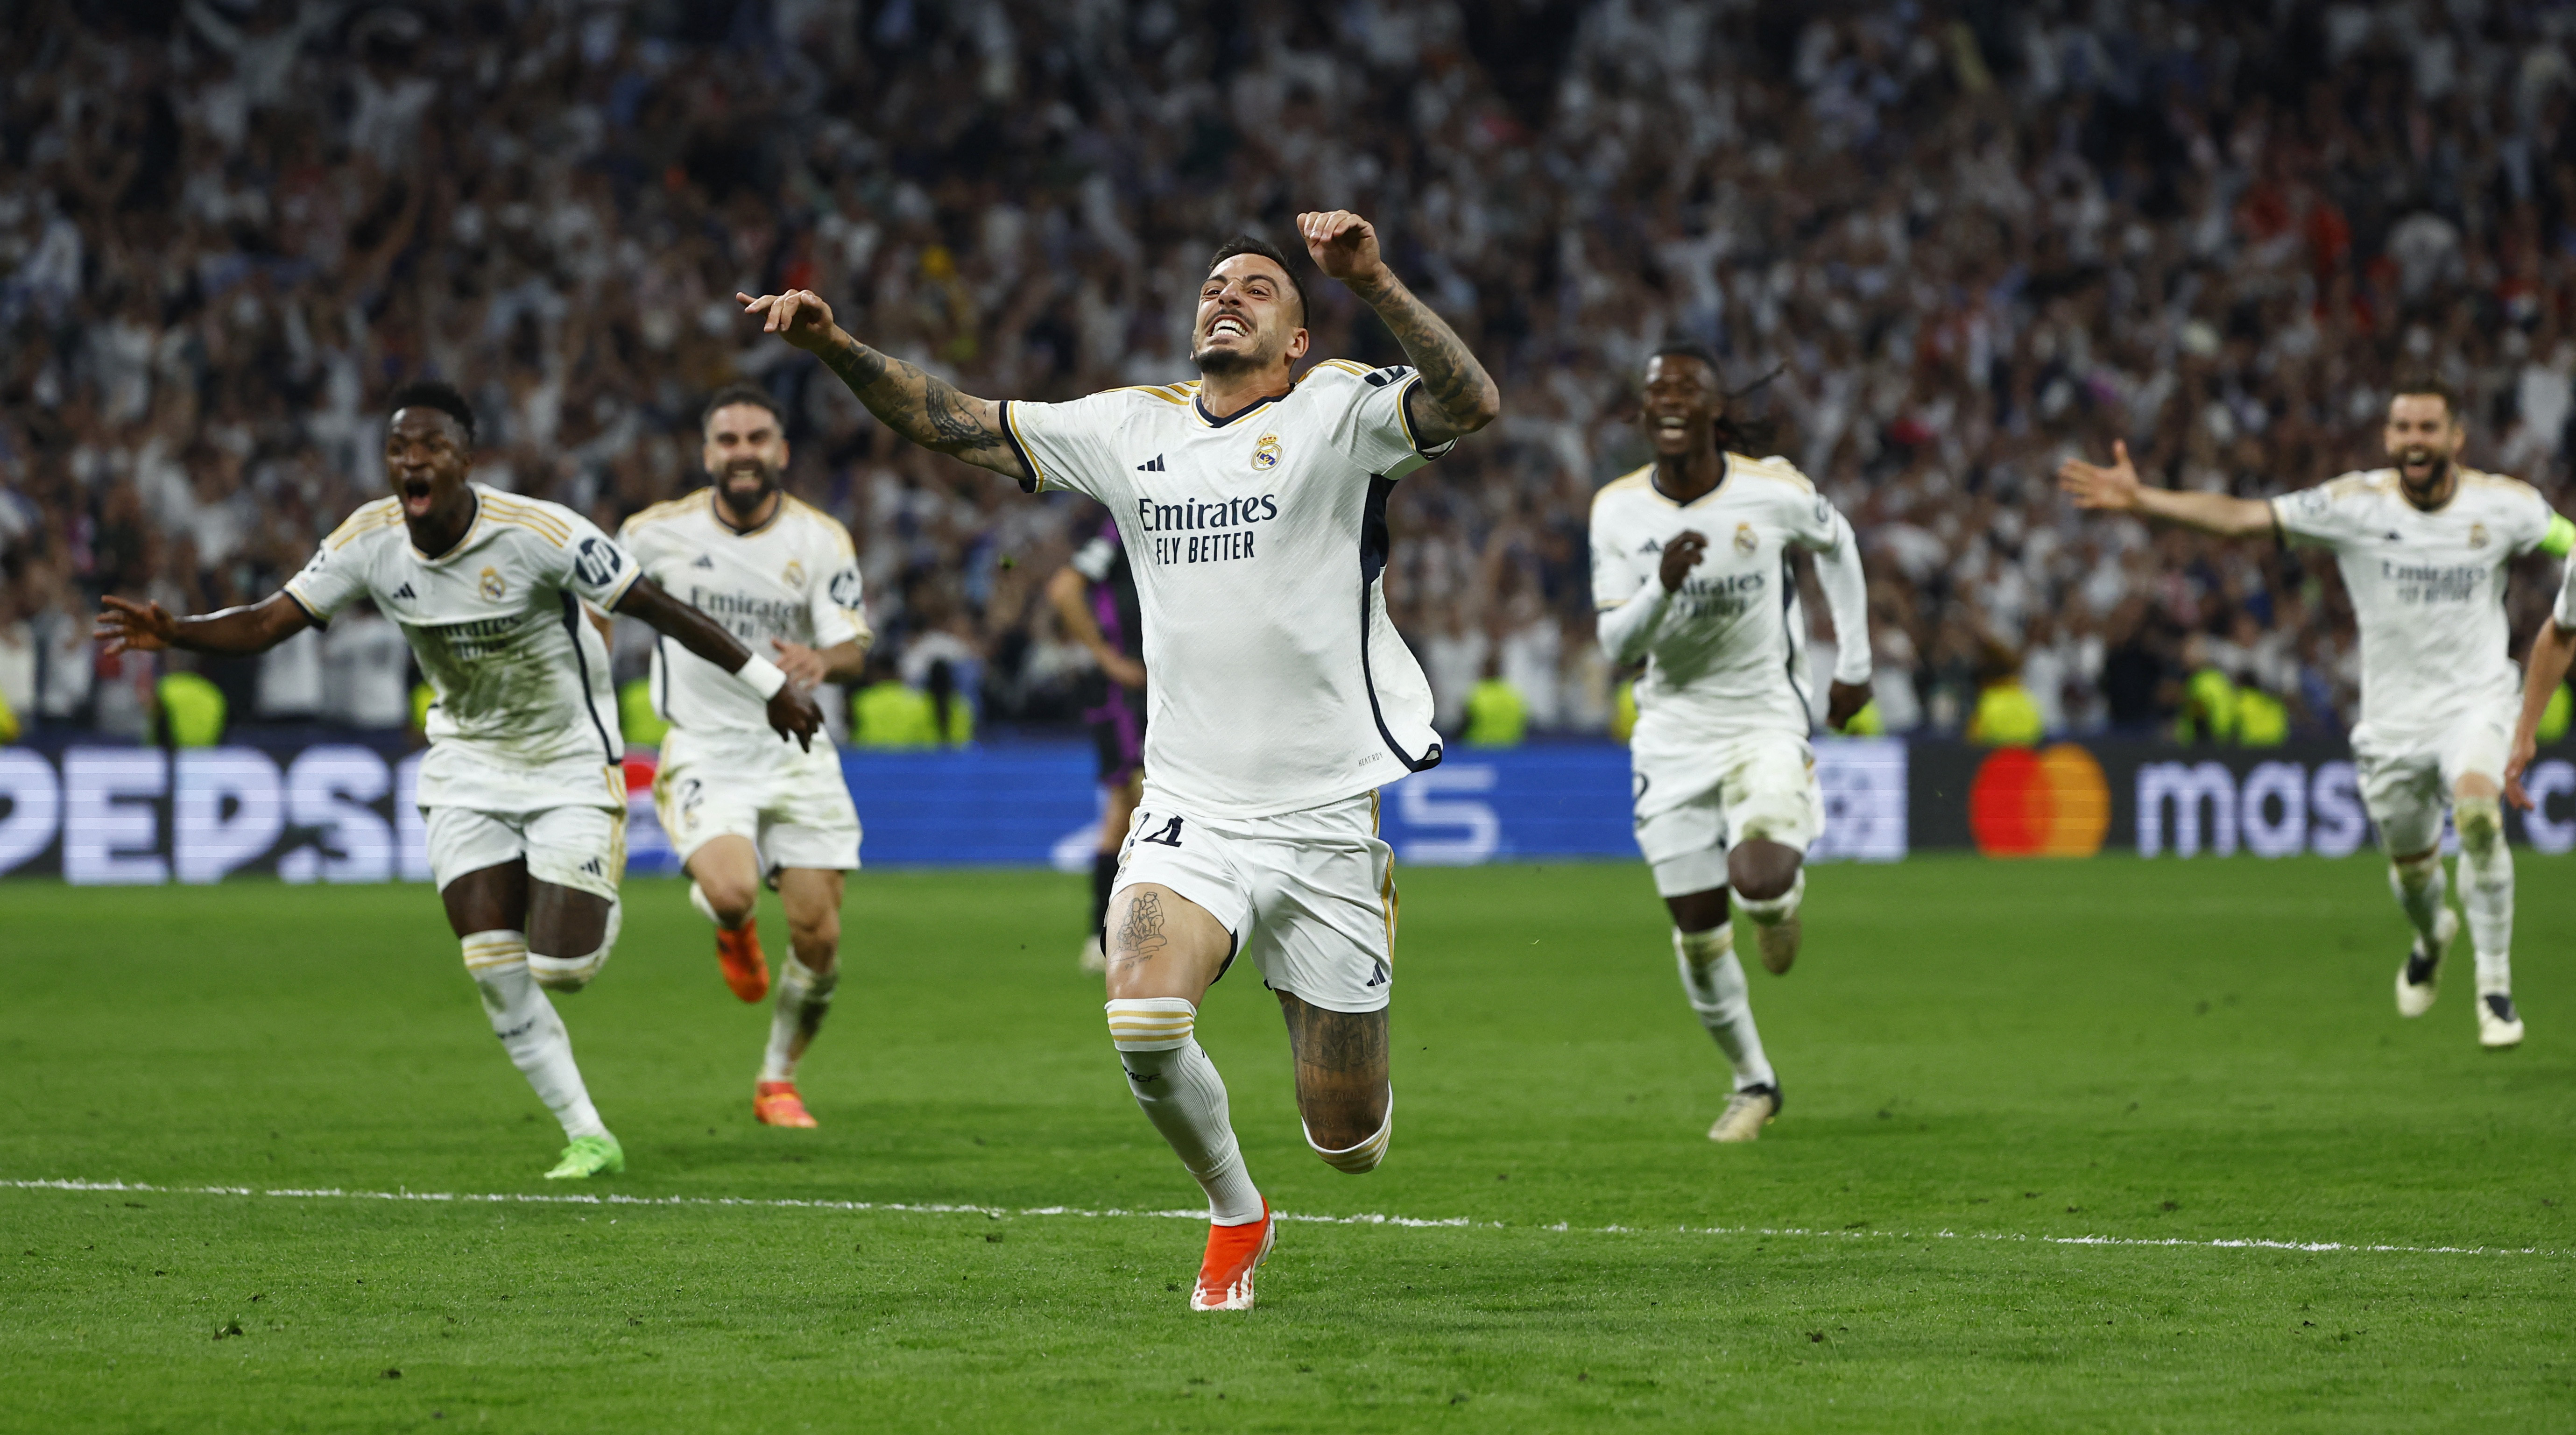 Real Madrid stuns Bayern Munich late to reach Champions League final but match marred by controversial decision - Bayern Munich's Performance and Controversial Decision